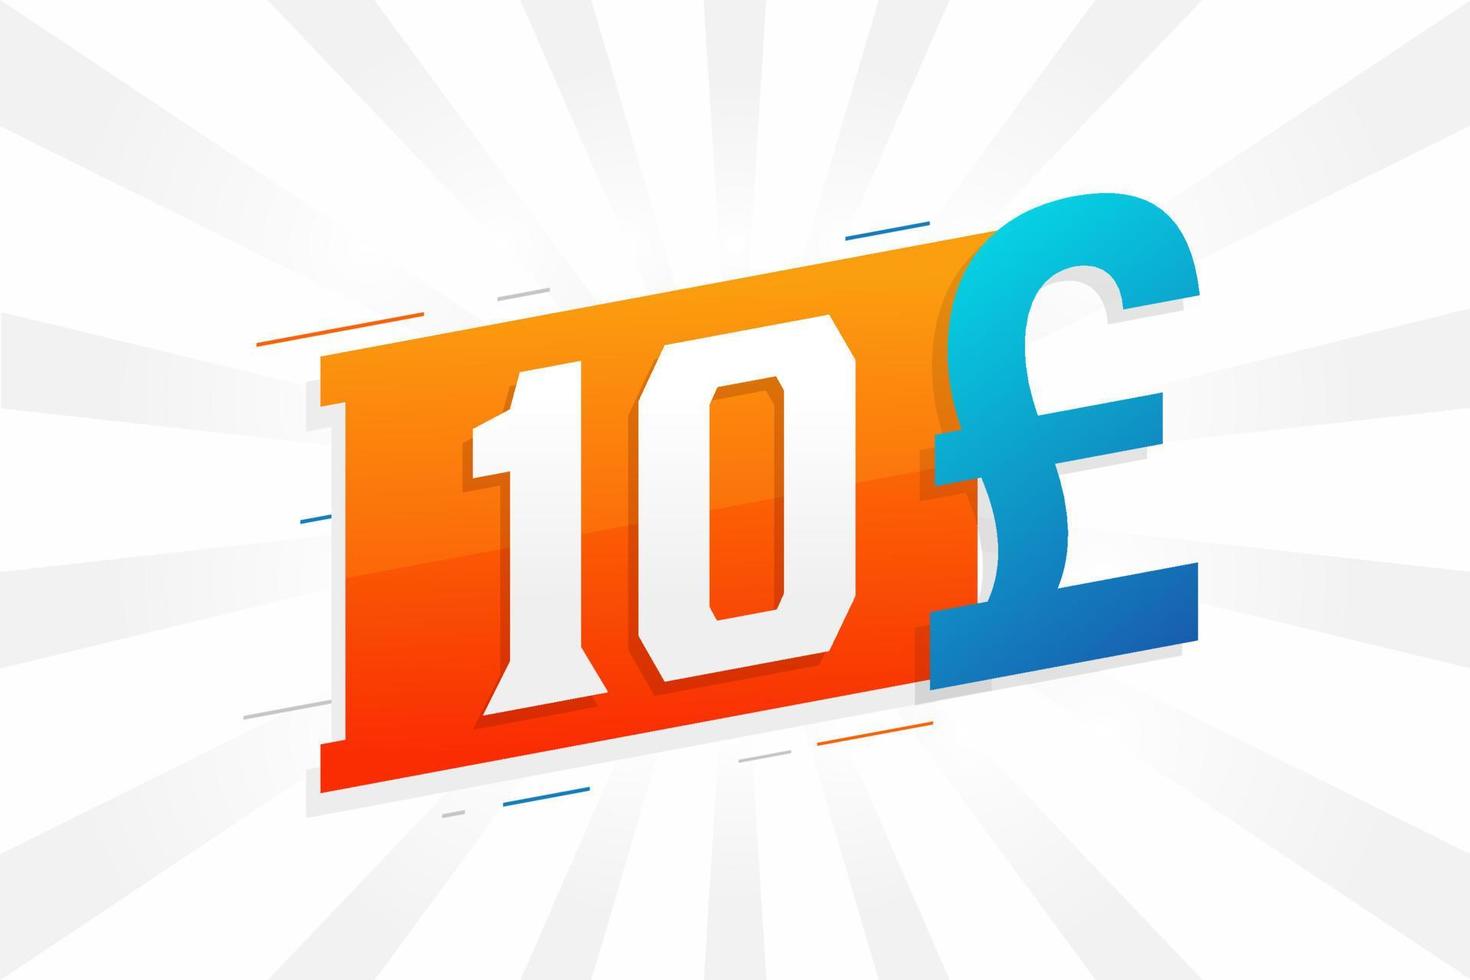 10 Pound Currency vector text symbol. 10 British Pound Money stock vector